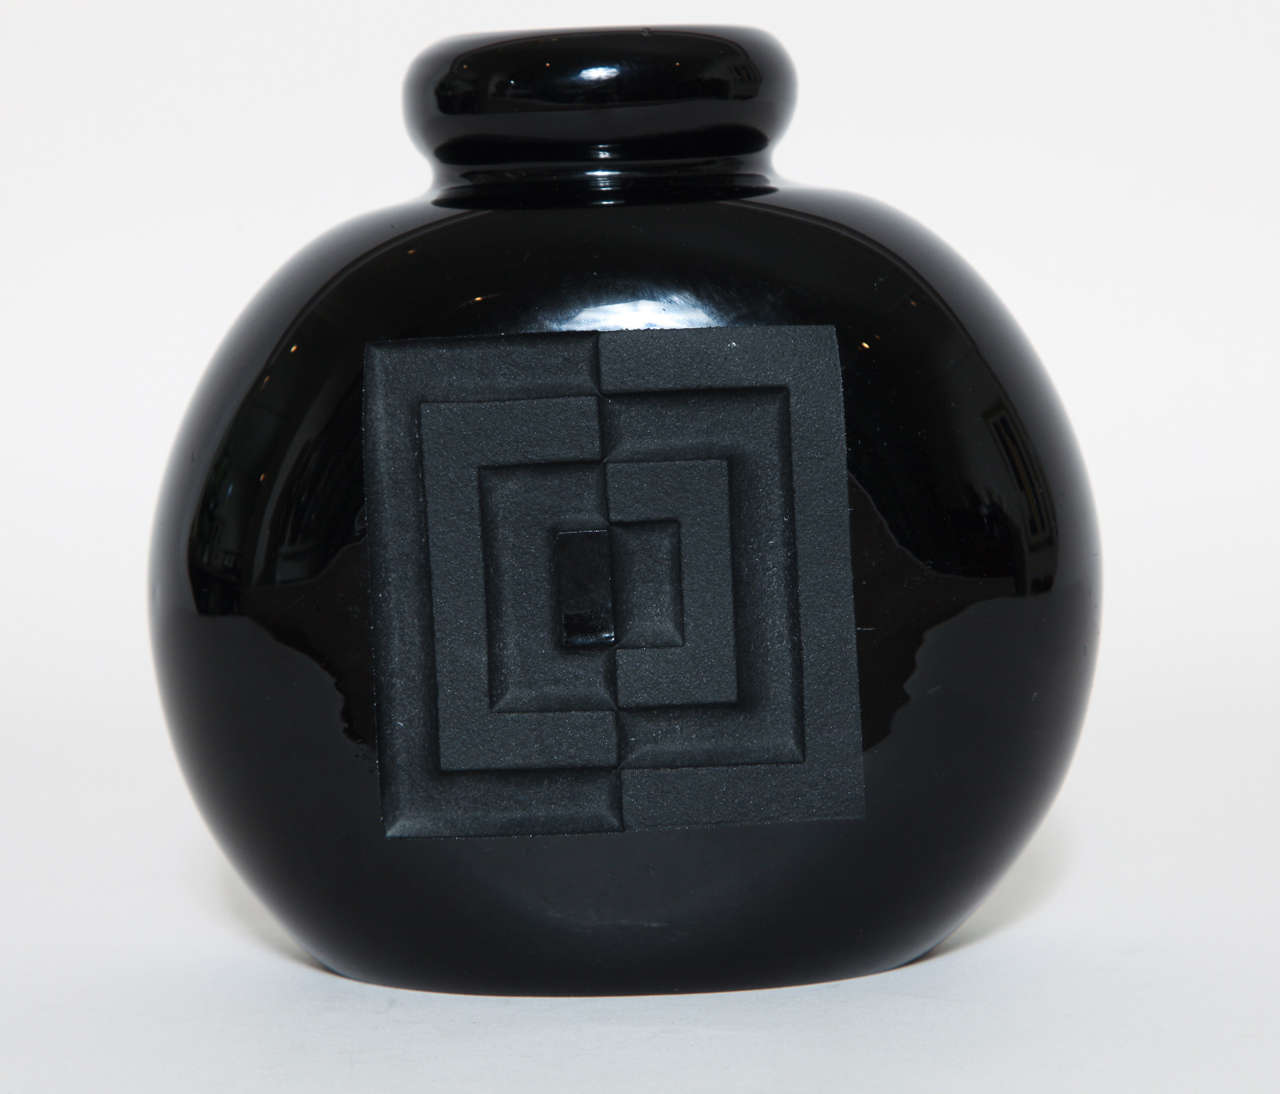 Black glass vase with deeply etched geometric design on front and back by Jean Luce (1895-1964).
Signed: artist's monogram

Jean Luce worked as a designer in a cubist-inspired style, rejecting the use of too much design and figurativeness in